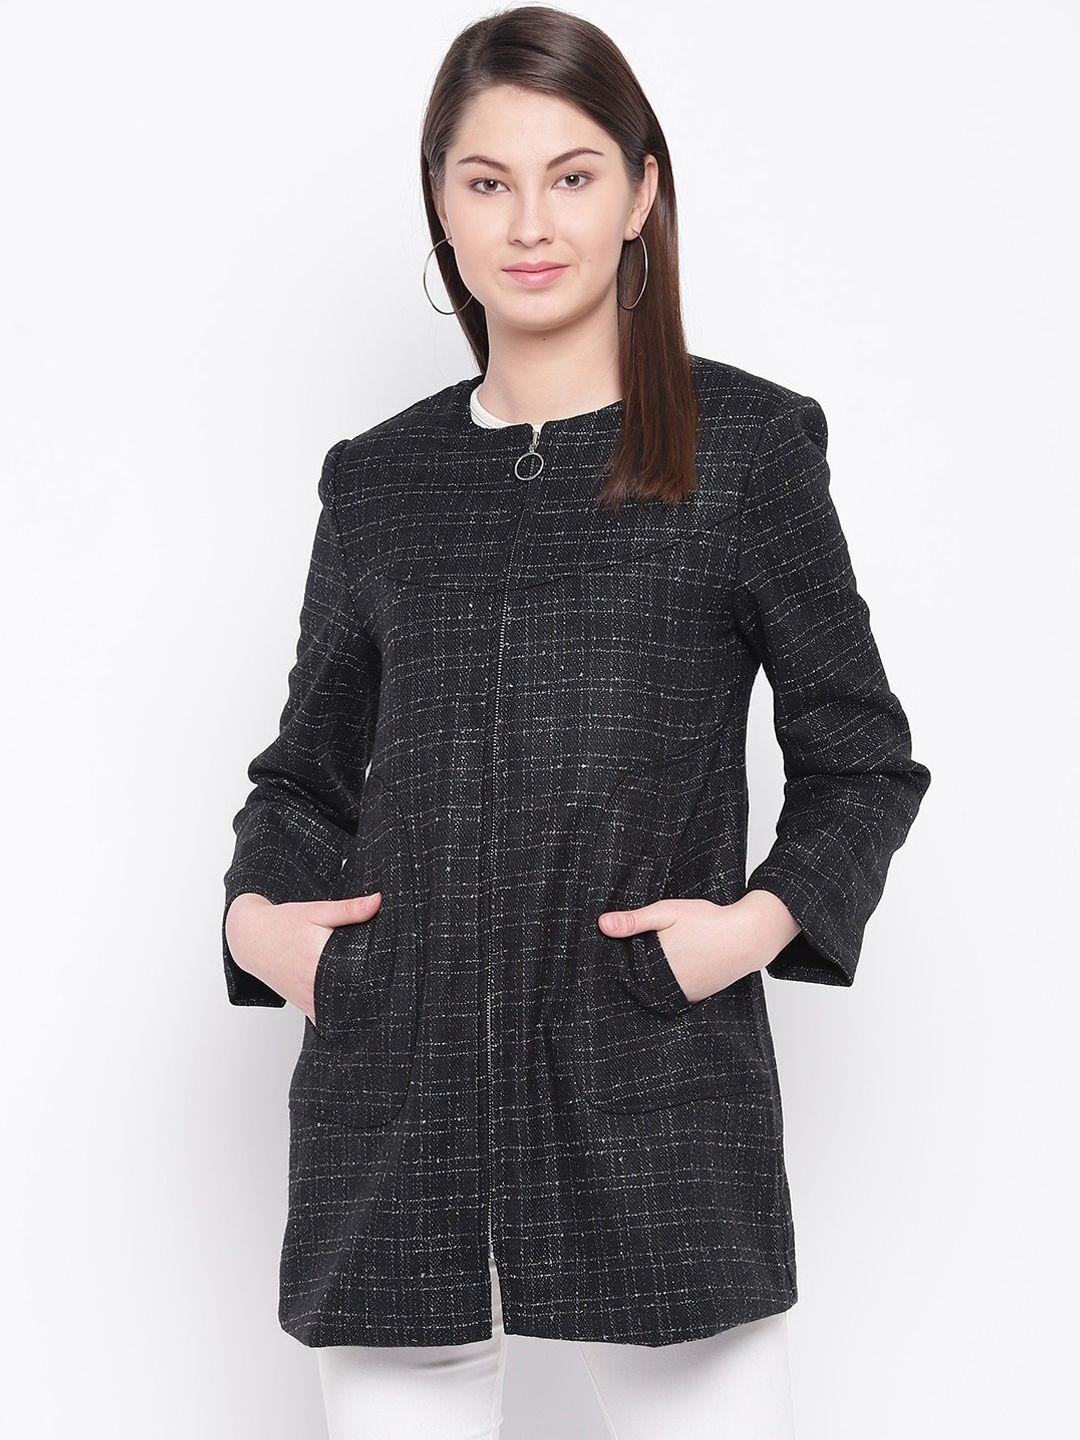 marie claire black checked woollen longline tailored jacket